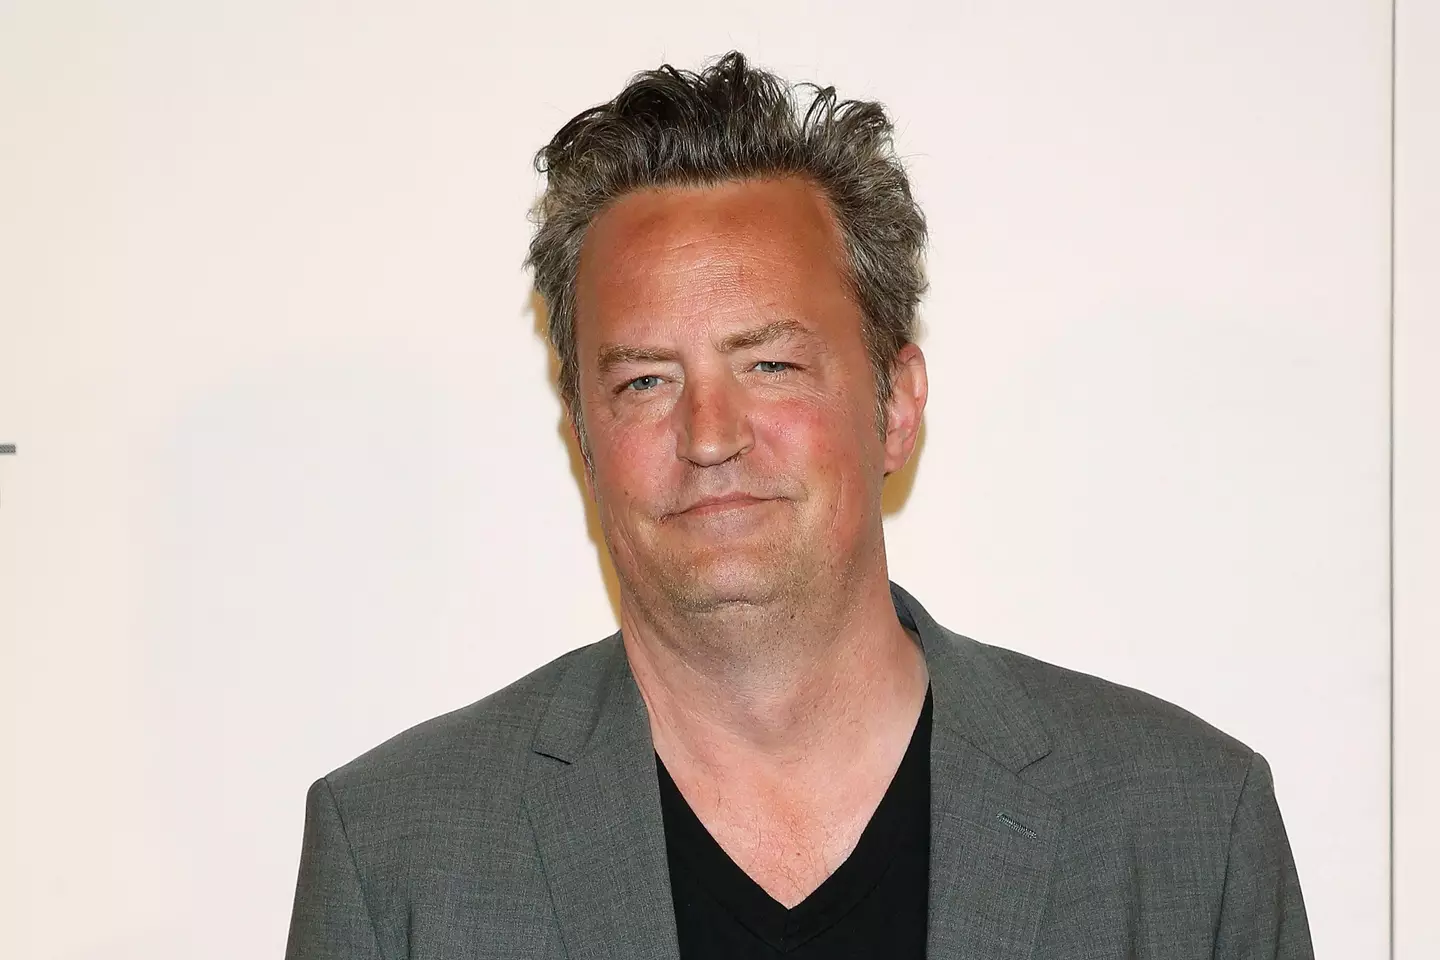 Matthew Perry's memoir is set to reveal his struggles with drink and drug addiction.